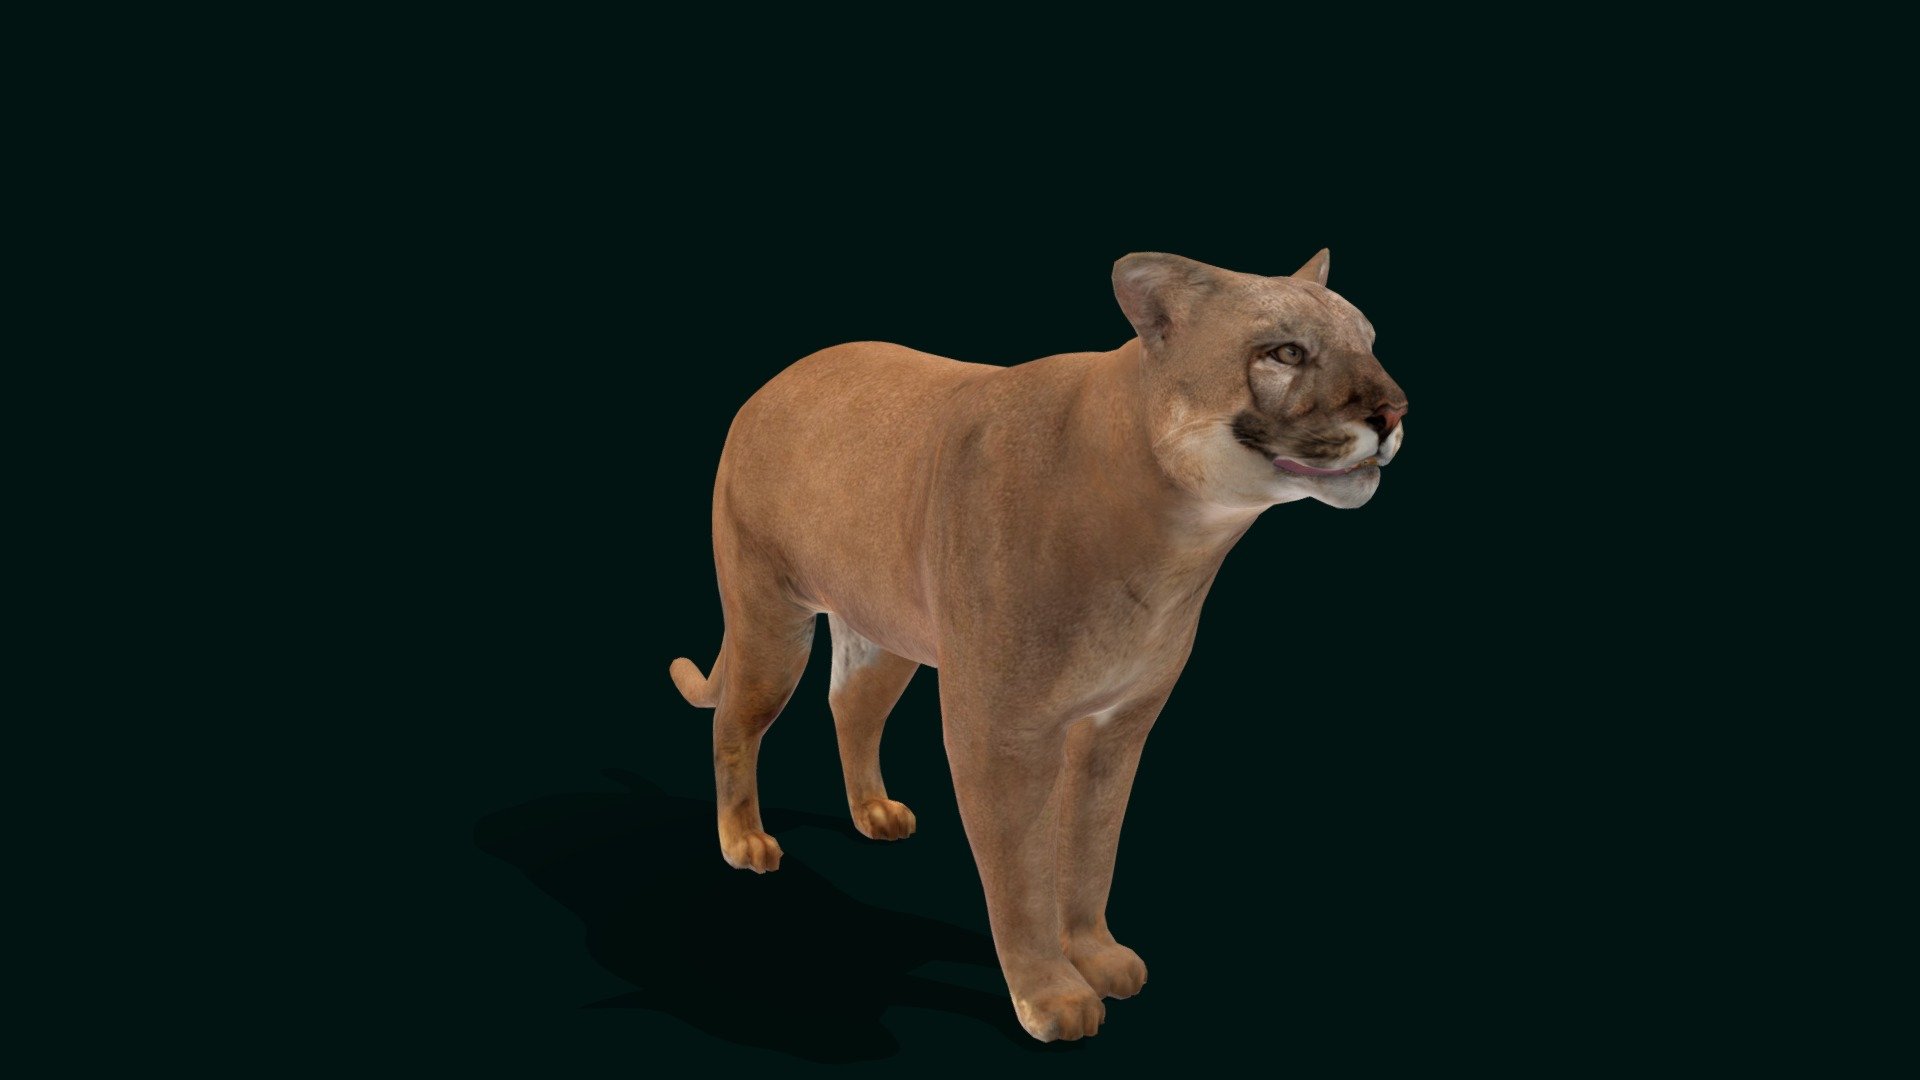 Florida Panther  (Puma) Endangered, Mammalia

Puma concolor Animal Mammal ( Mountain Lion ,Catamount) Cougar ,Large Cat

1 Draw Calls

Lowpoly

Game Ready Asset

Subdivision Surface Ready

Single Animations

4K PBR Textures Materials

Unreal FBX (Unreal 4,5 Plus)

Unity FBX

Blend File 3.6.5 LTS

USDZ File (AR Ready). Real Scale Dimension (Xcode ,Reality Composer, Keynote Ready)

Textures Files

GLB File (Unreal 5.1 Plus Native Support)

Gltf File ( Spark AR, Lens Studio(SnapChat) , Effector(Tiktok) , Spline, Play Canvas,Omiverse ) Compatible



Triangles -11901

Faces     -6197

Edges     -12215

Vertices  -6030

Diffuse, Metallic, Roughness , Normal Map ,Specular Map,AO,

The cougar, also known as the puma, mountain lion, catamount, or panther, is a large cat native to the Americas, second in size only to the stockier jaguar. They are not technically grouped with the &ldquo;true